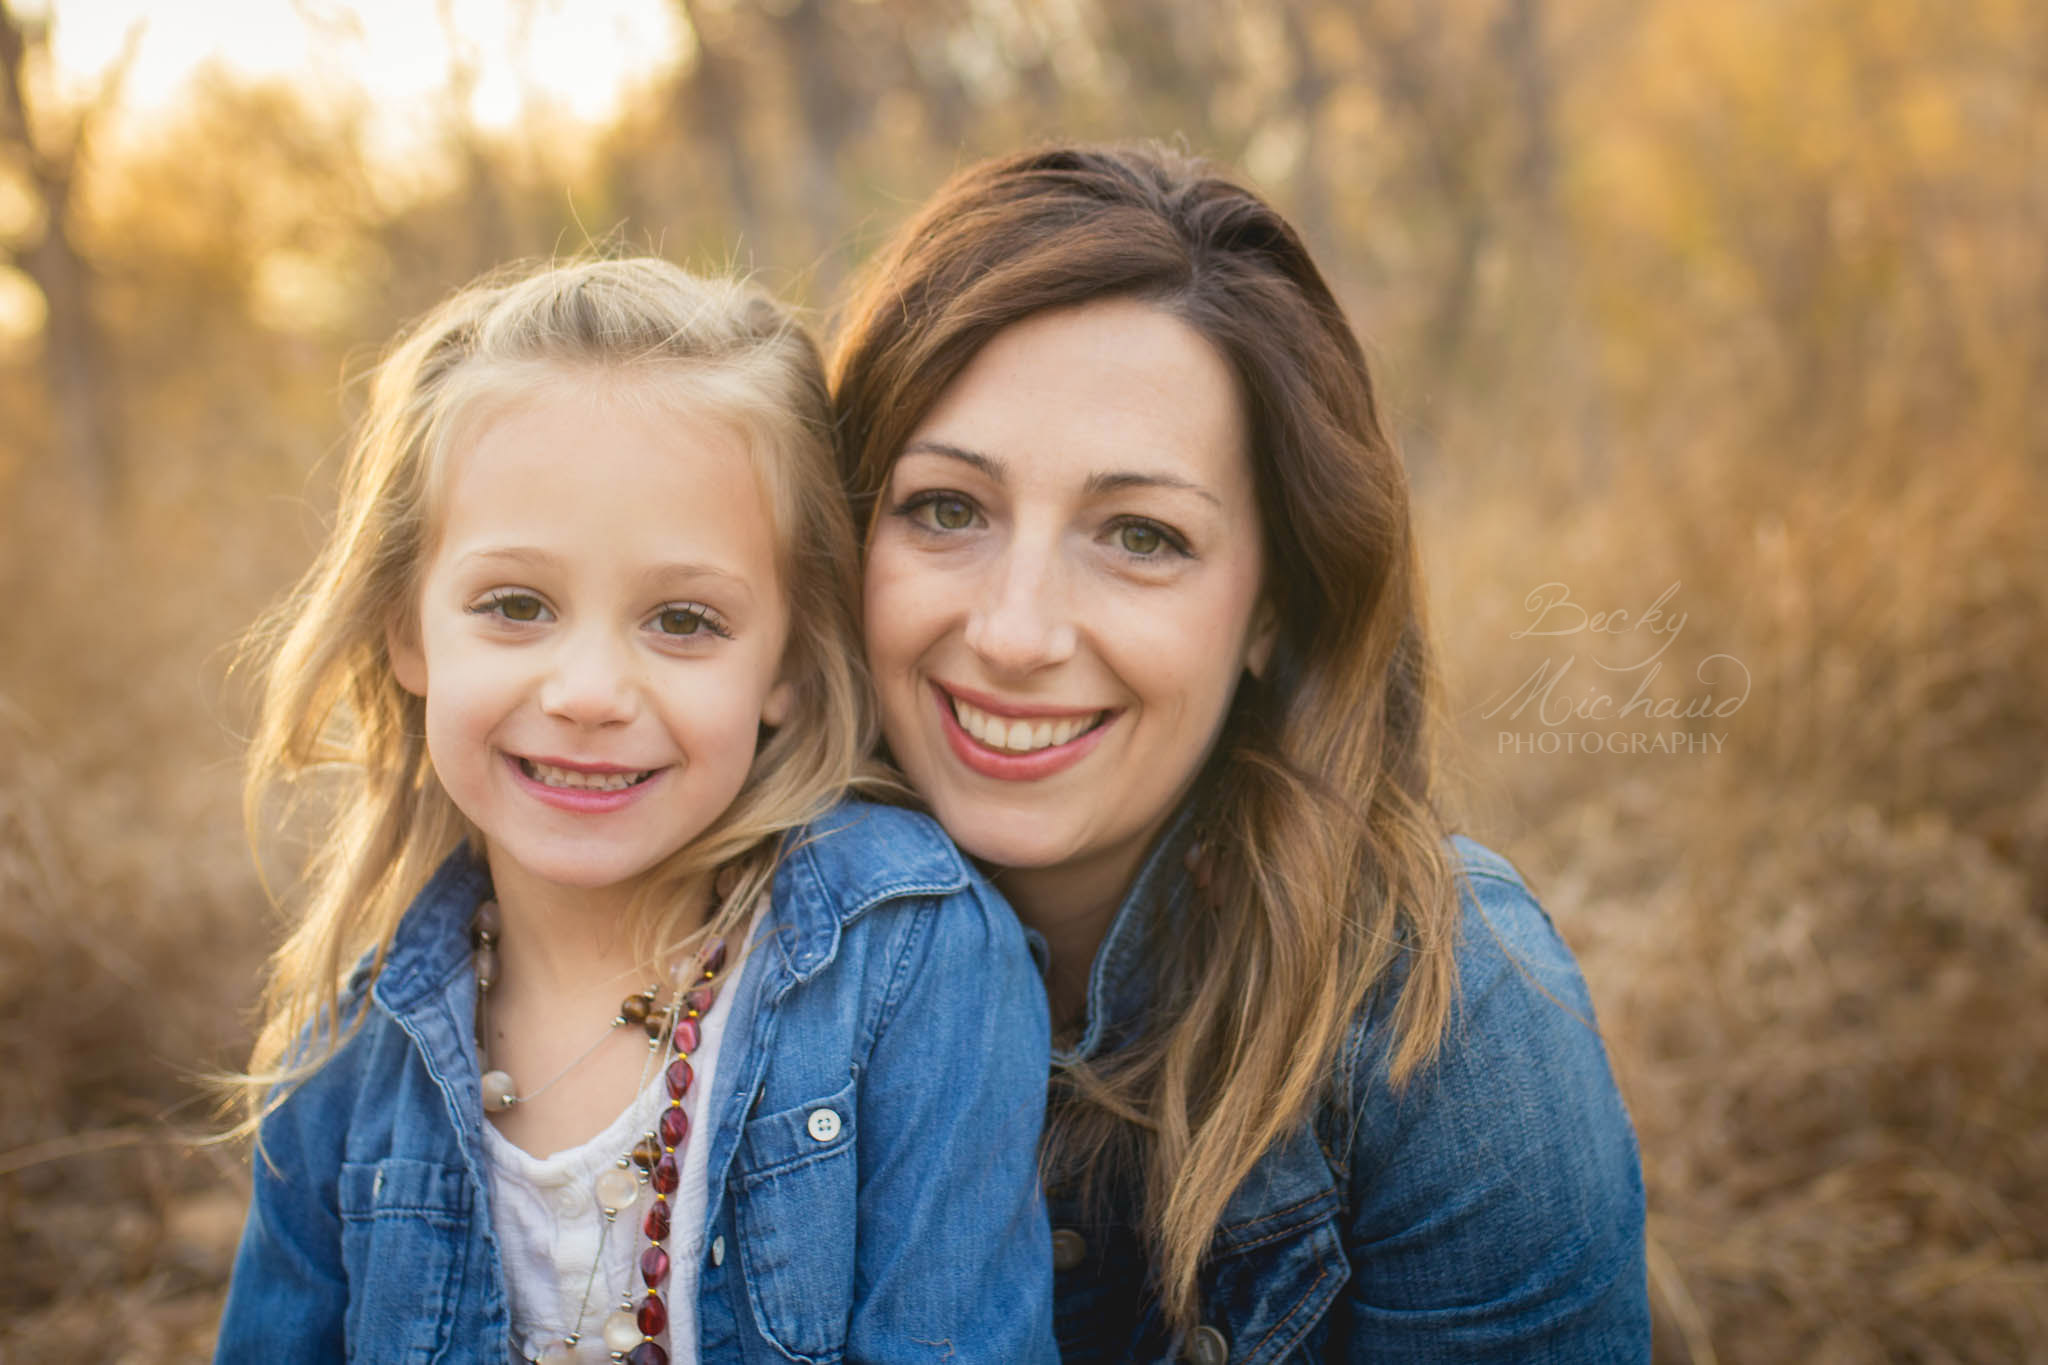 Sunny portrait of a mother and daughter taken by family photographer Becky Michaud